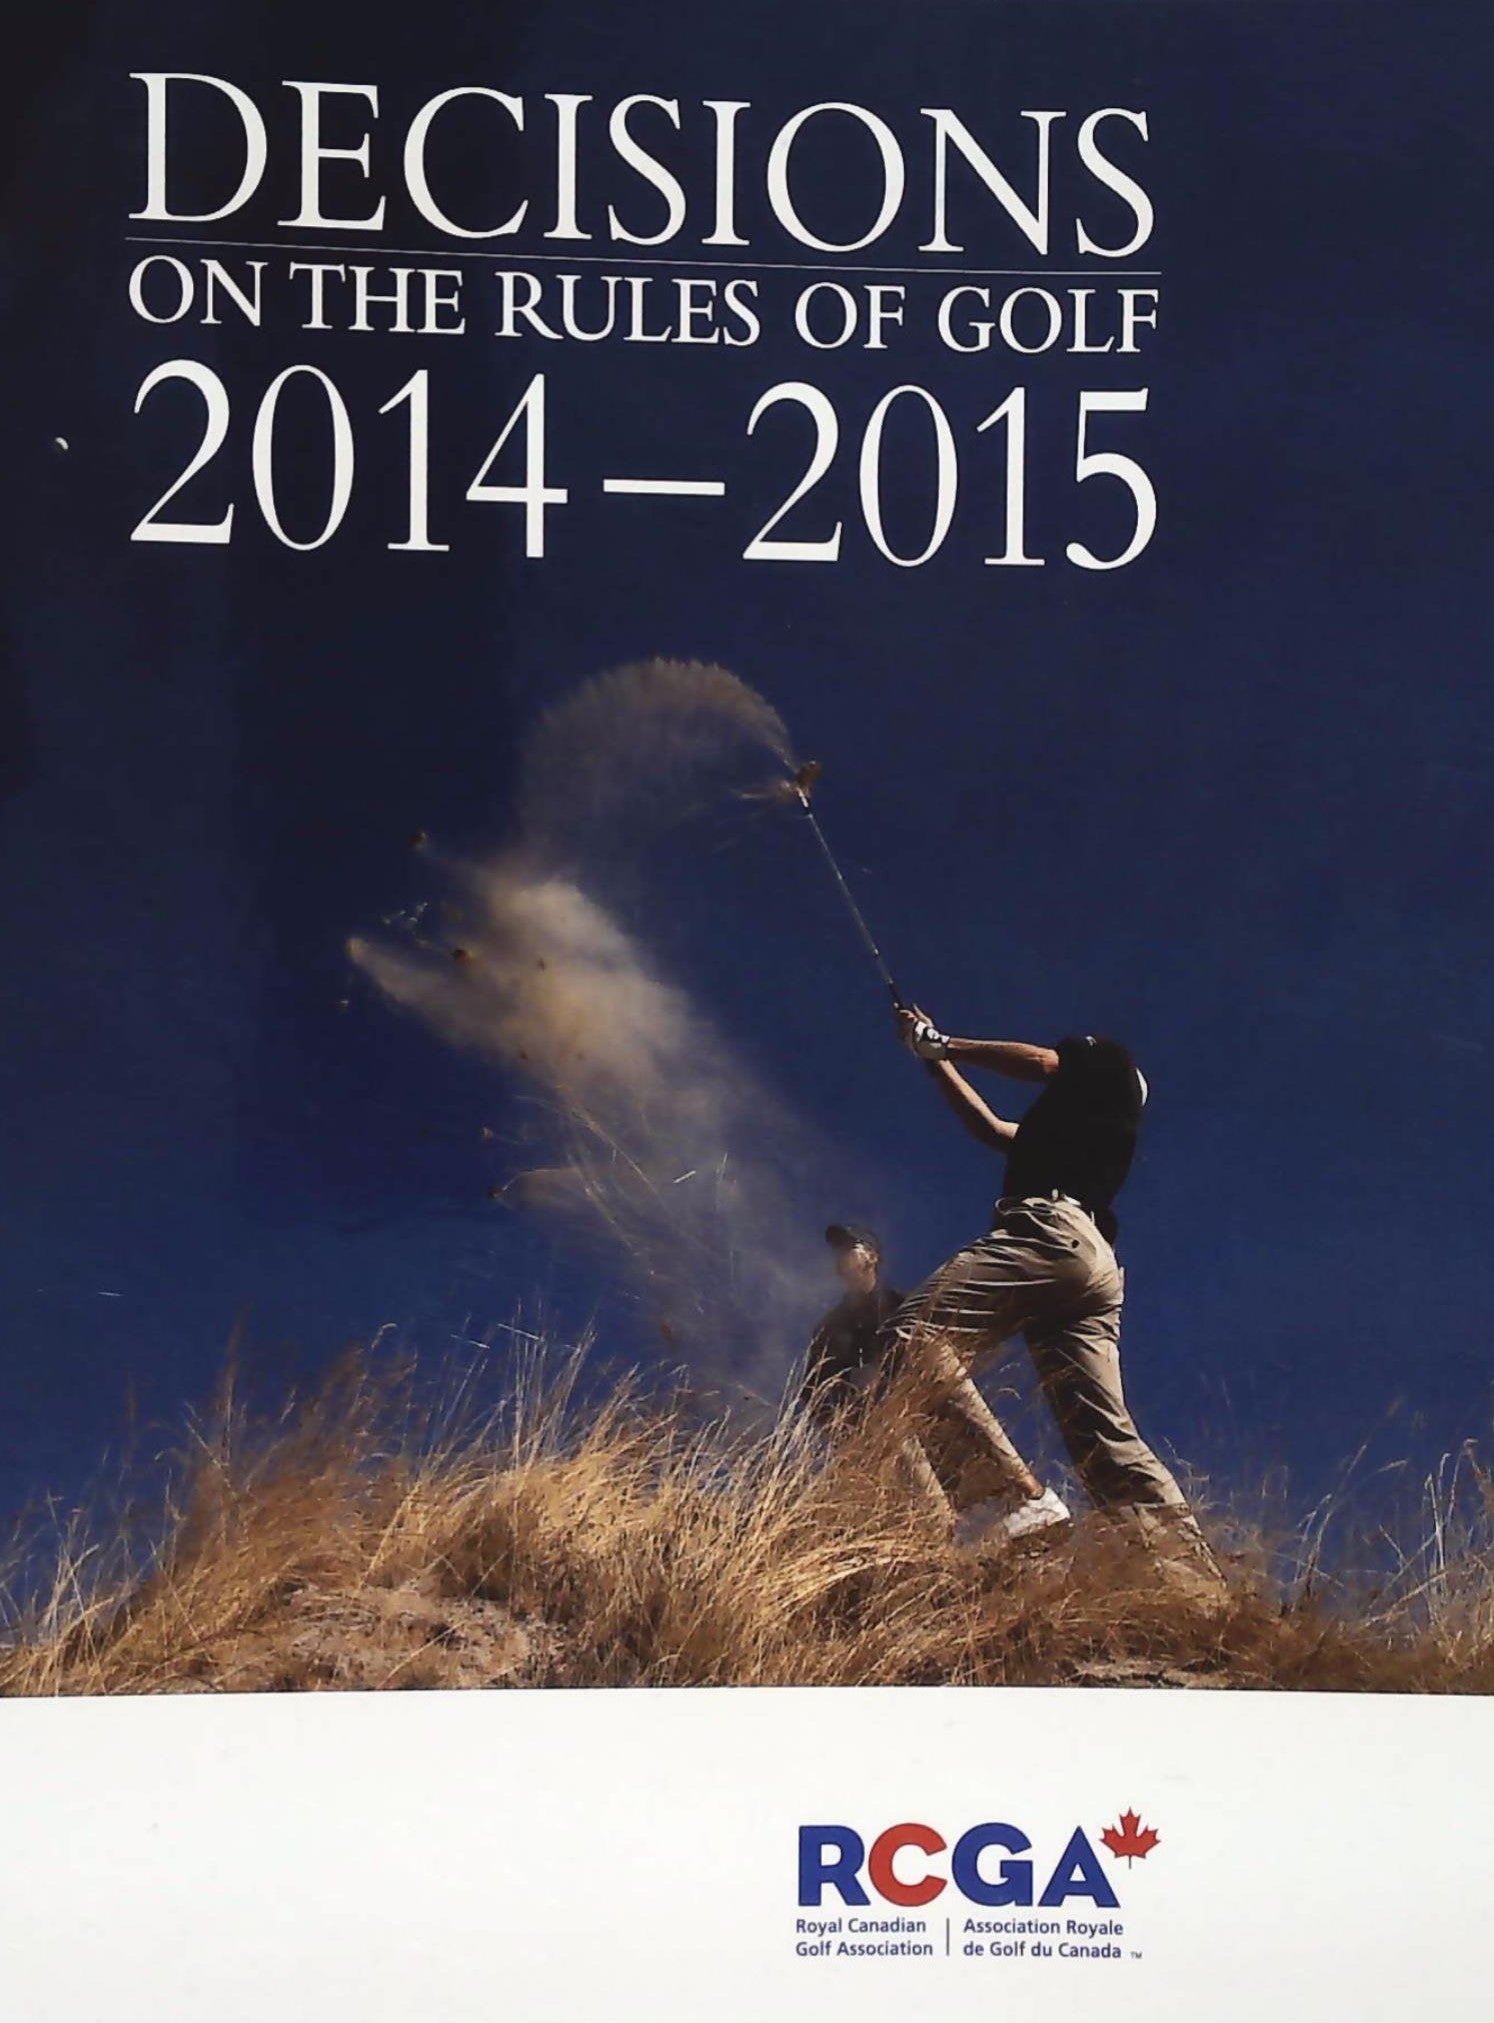 Decisions on the rules of golf 2014-2015 (Royal Canadian Golf Association)